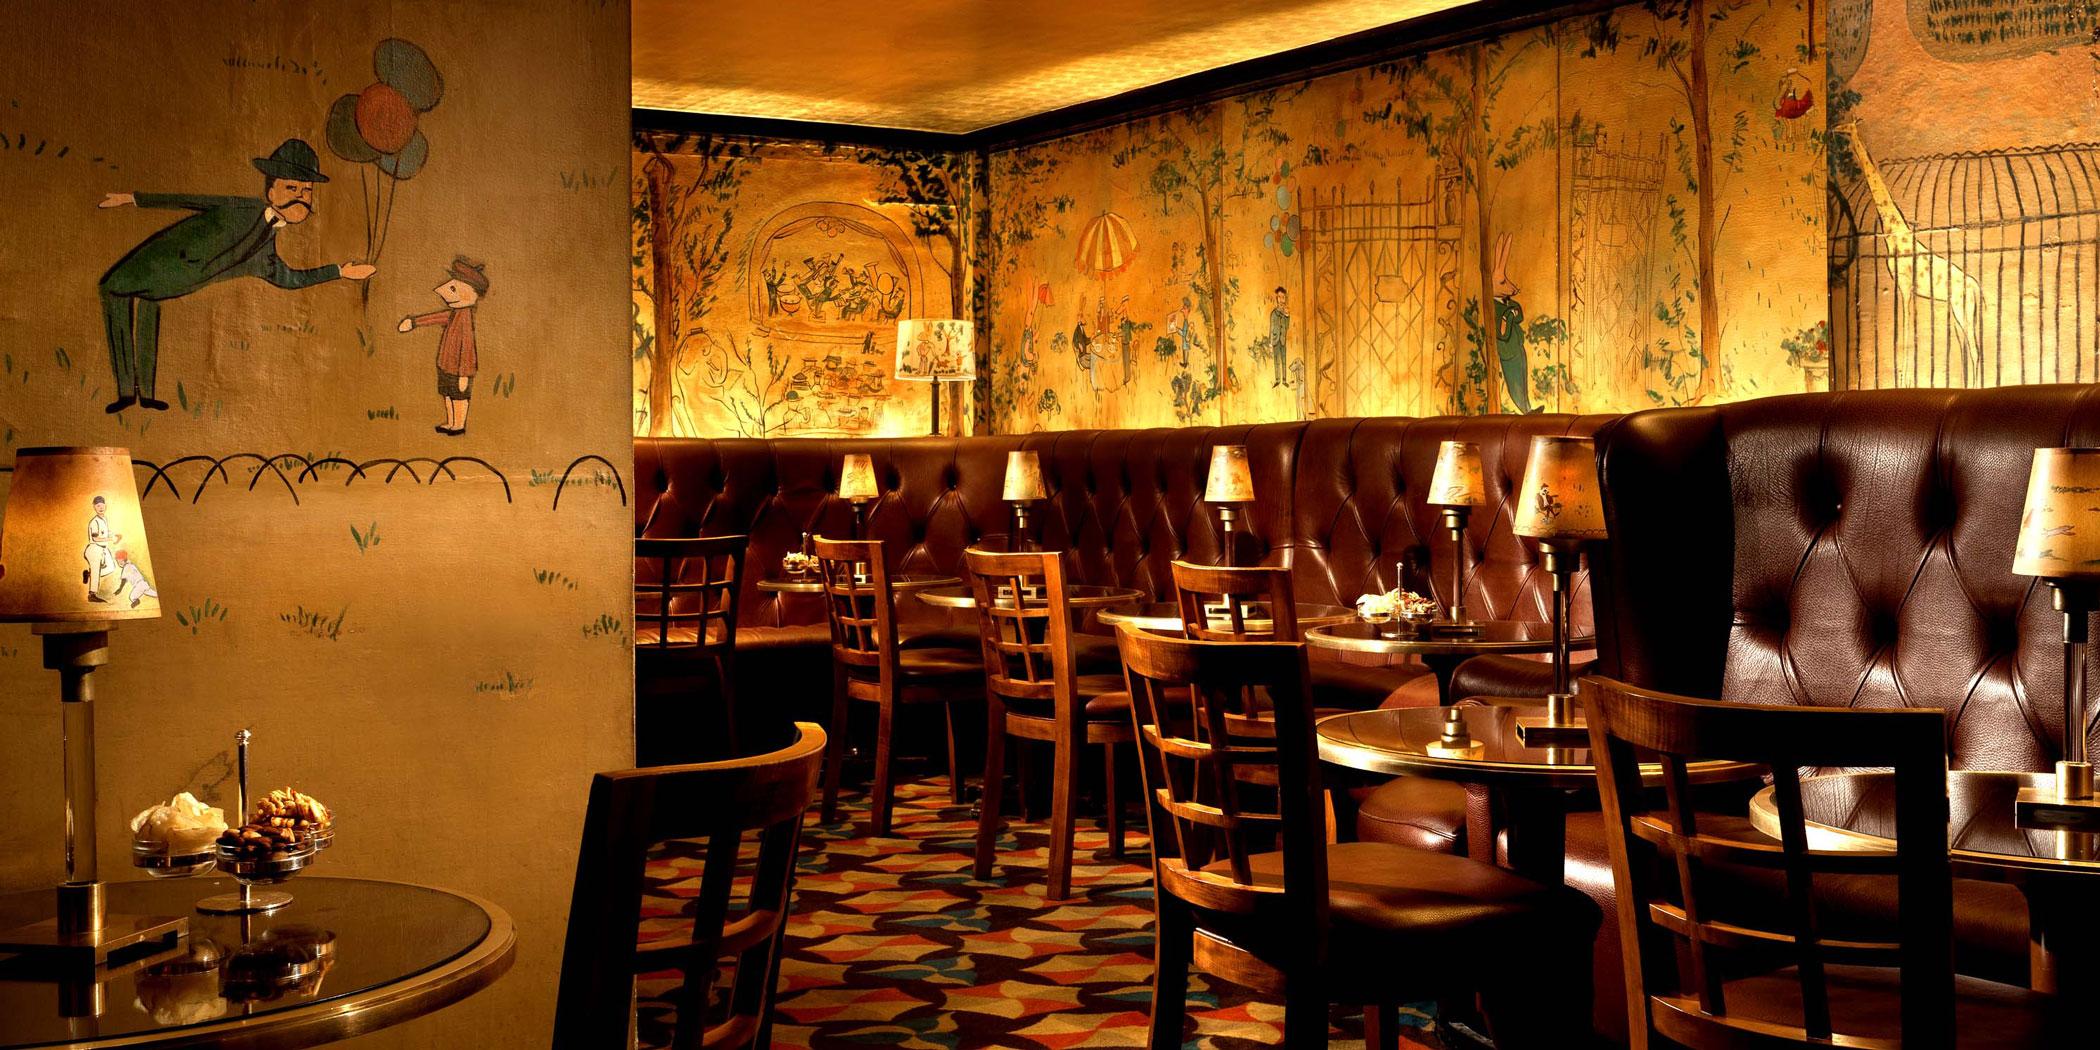 Ludwig Bemelman painted a huge mural in the bar at the Carlyle Hotel, depicting the four seasons of Central Park with animals instead of people.